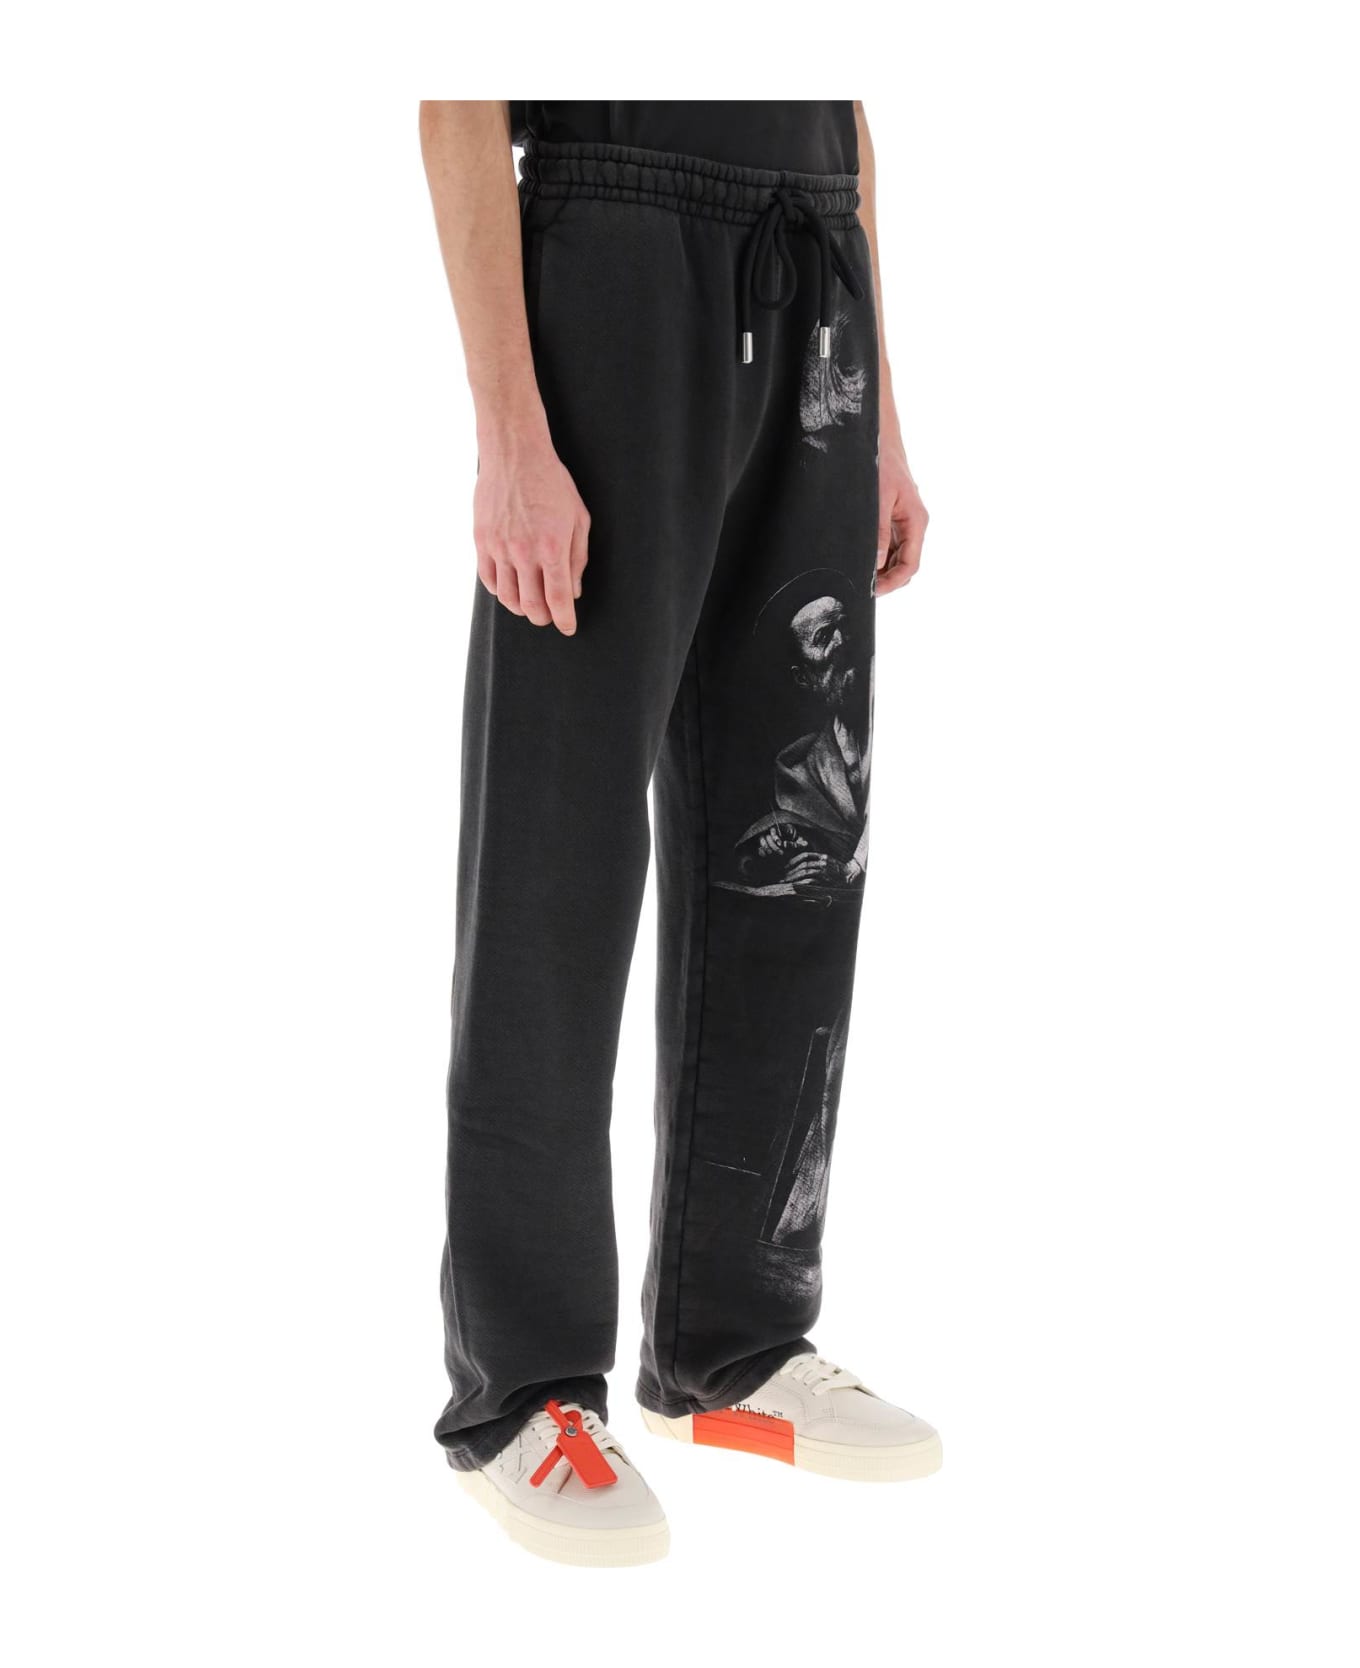 Off-White Pants With Drawstring And Graphic Print - BLACK GREY (Grey)